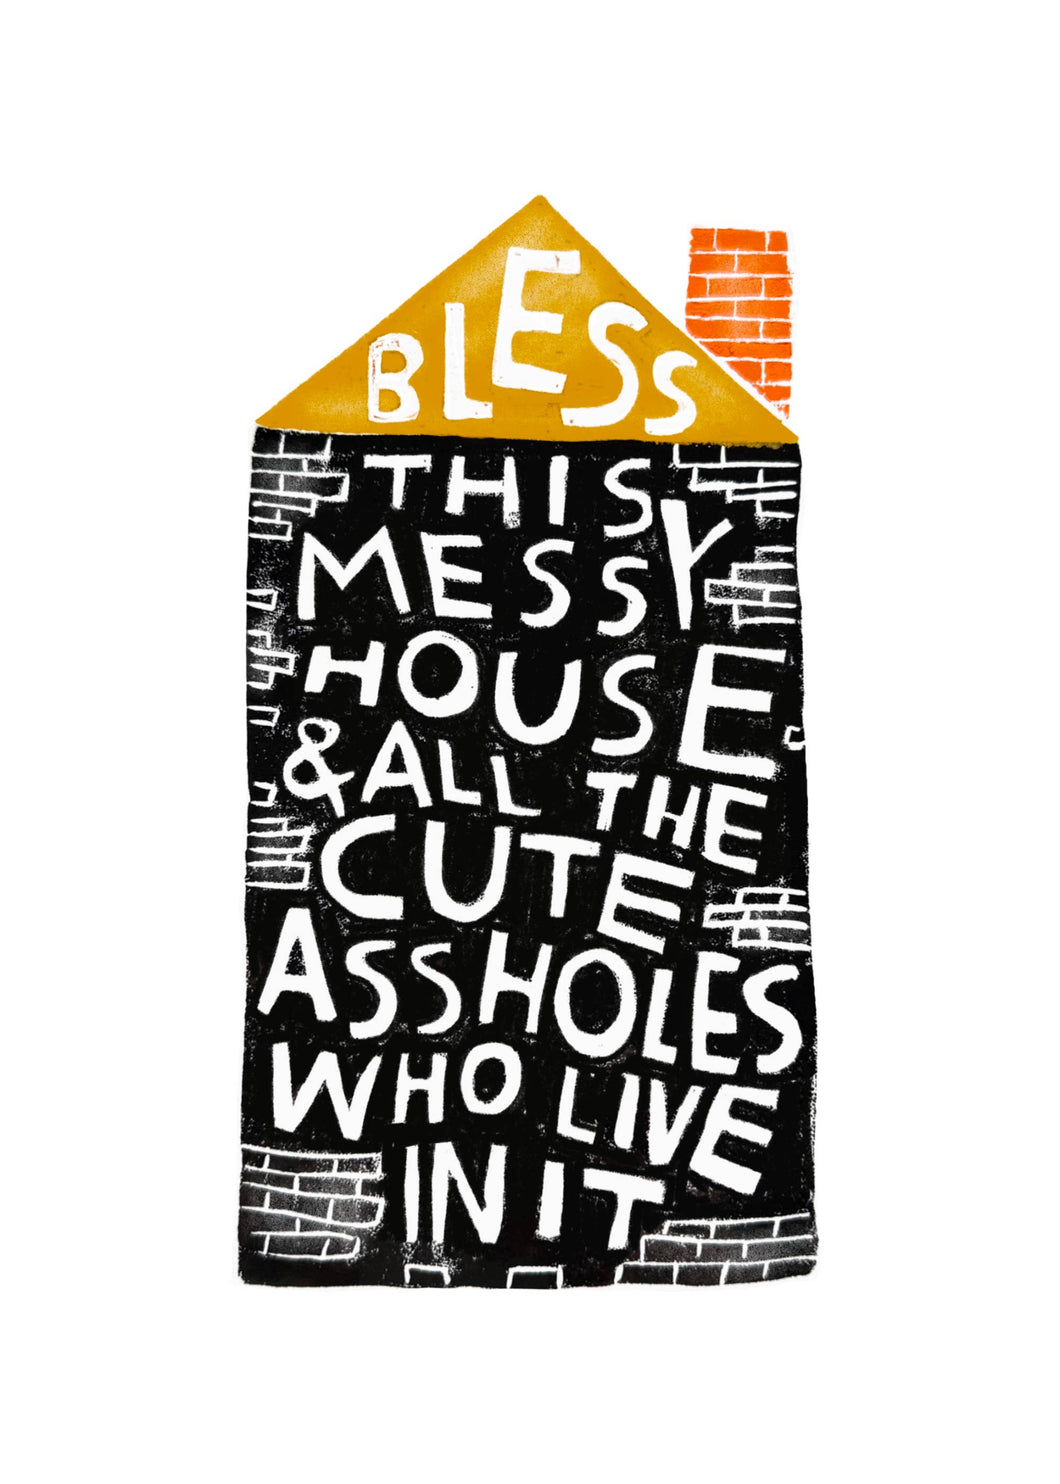 BLESS THIS MESSY HOUSE Small Art Print